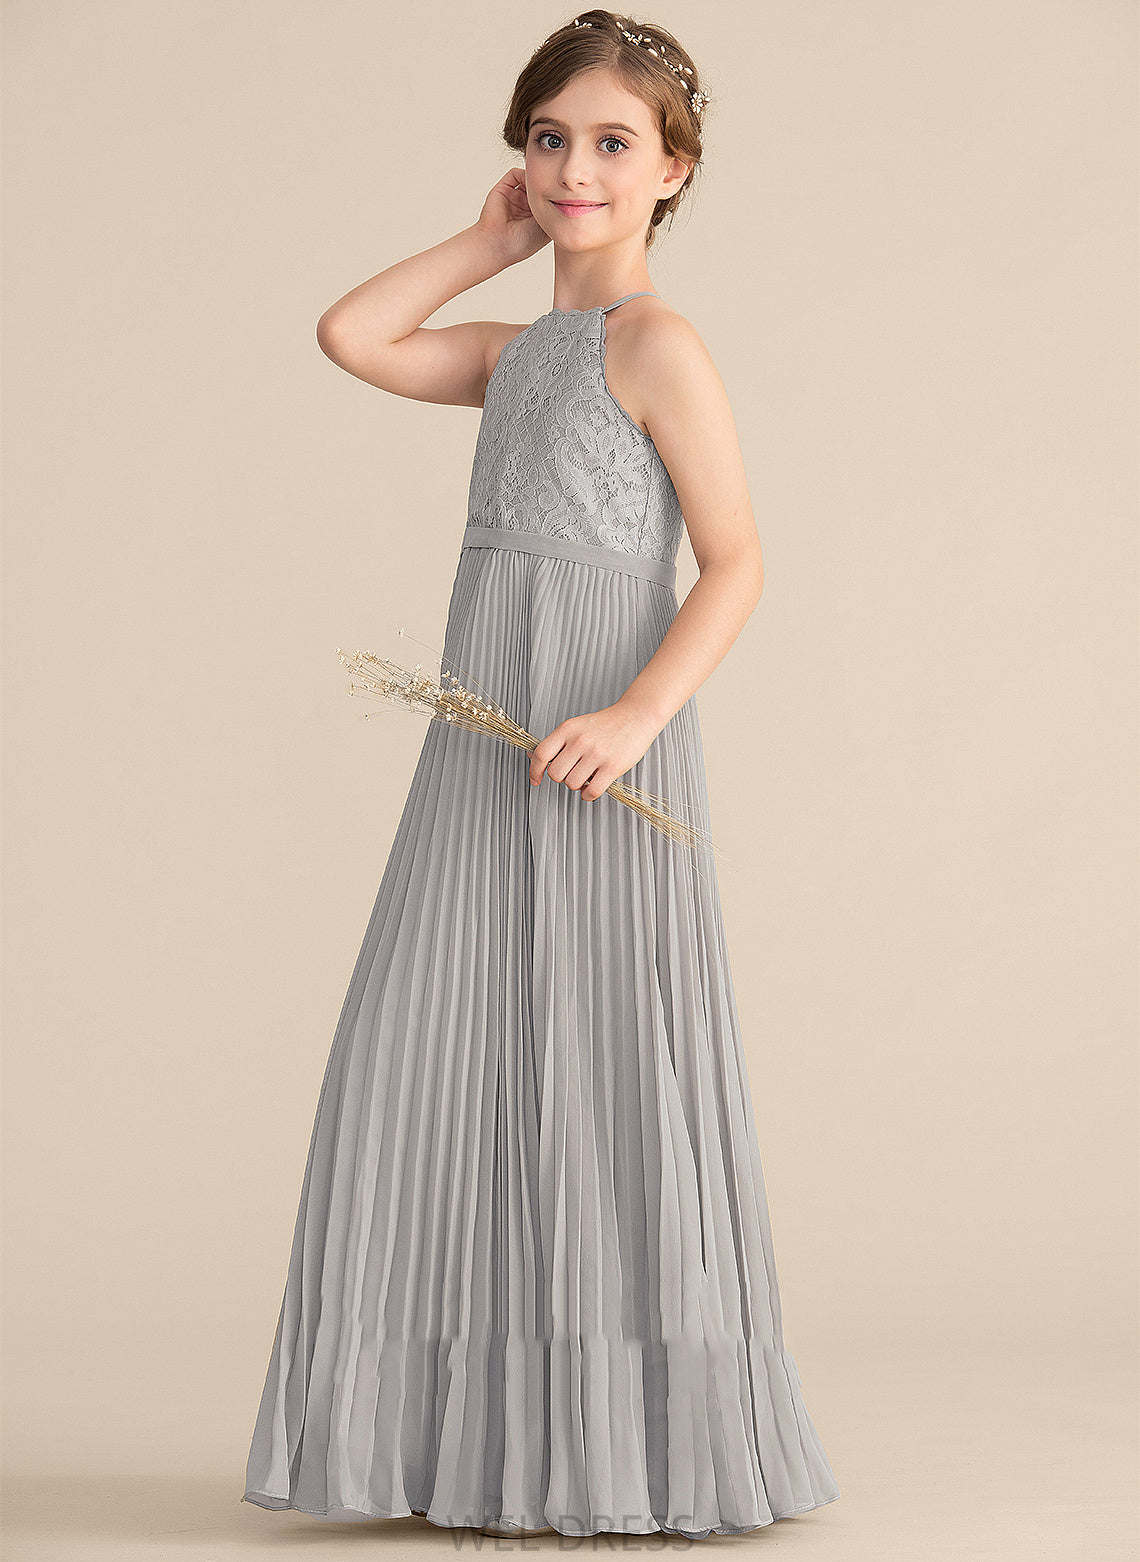 Lace Chiffon Junior Bridesmaid Dresses Neck Scoop With A-Line Hallie Floor-Length Pleated